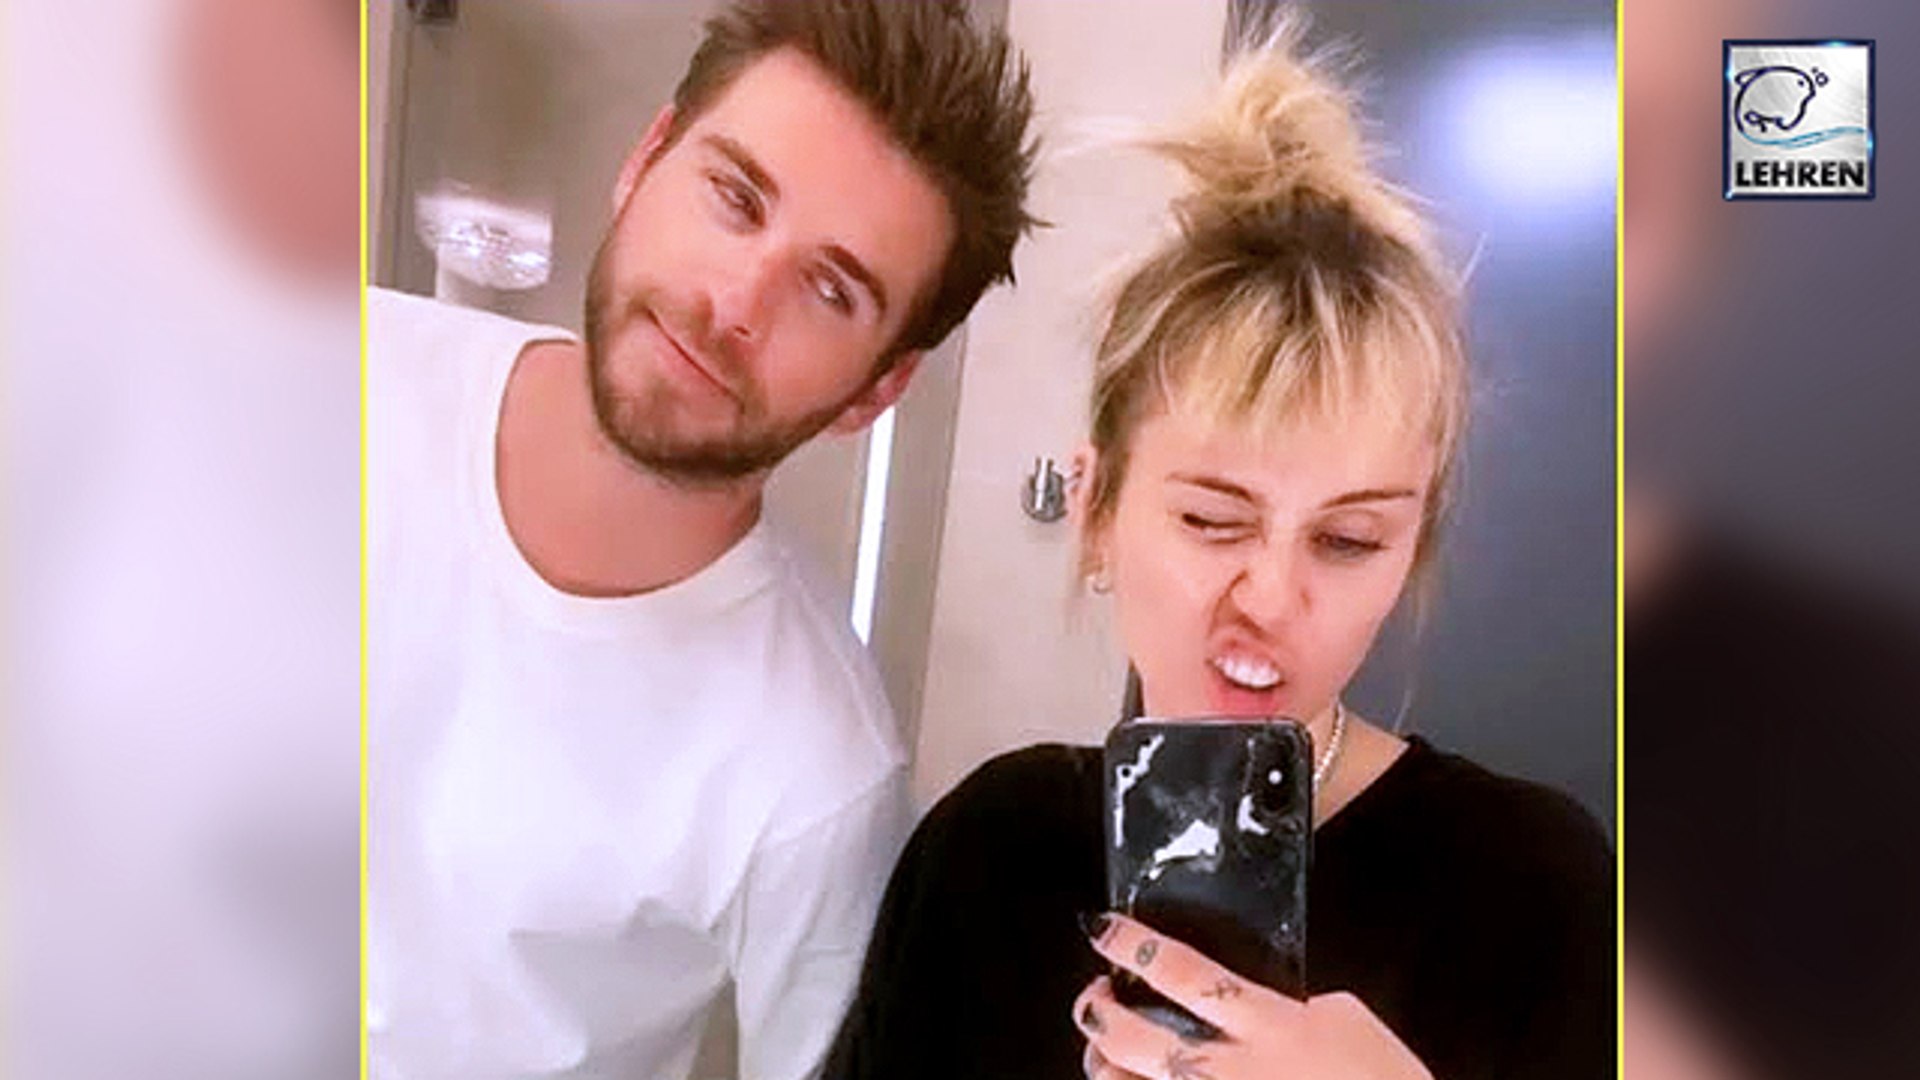 Will Miley Cyrus & Liam Hemsworth Ever Get Back Together Again?